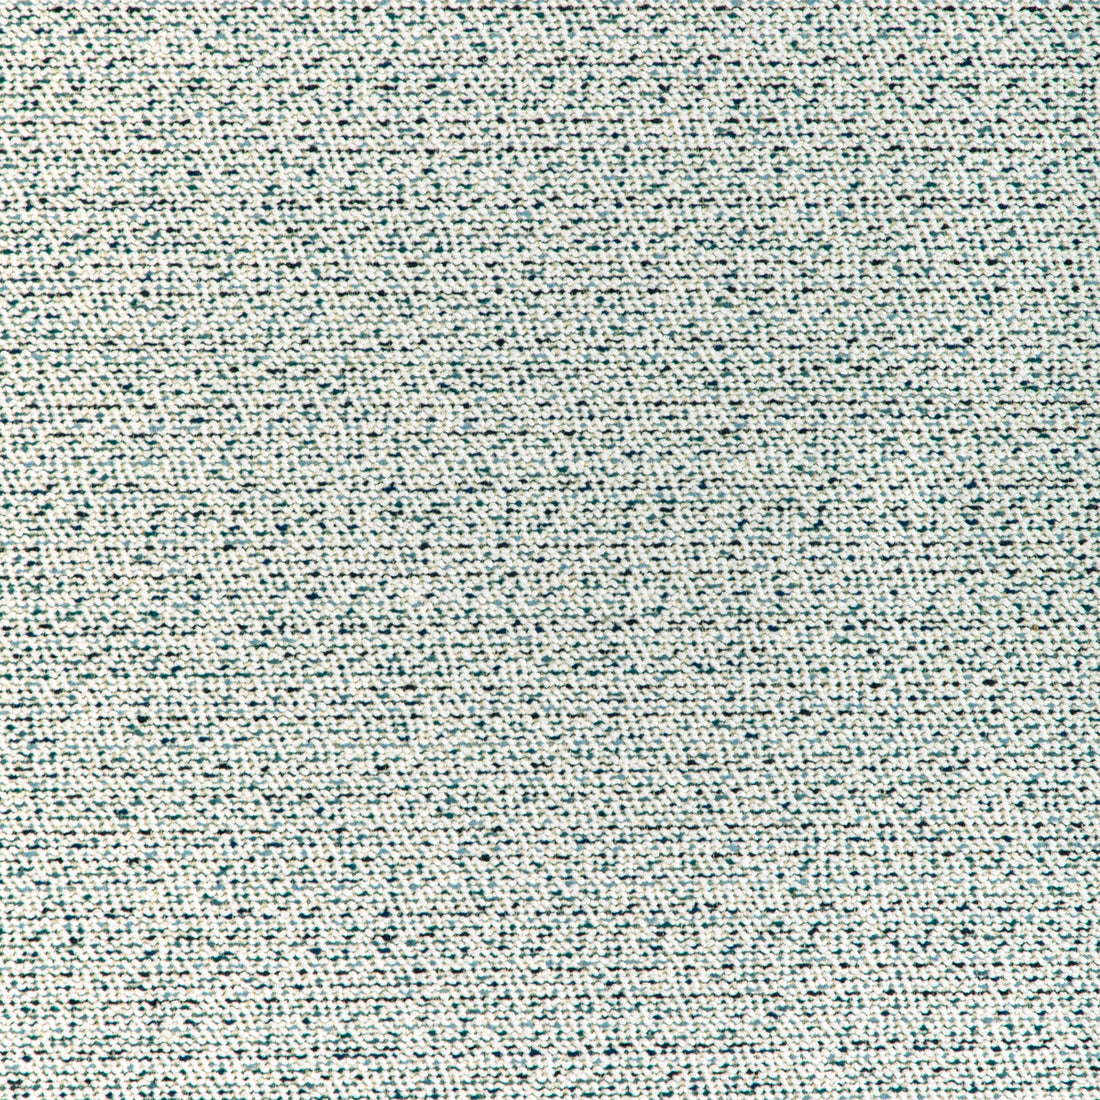 Linden fabric in indigo color - pattern 37047.5.0 - by Kravet Design in the Thom Filicia Latitude collection